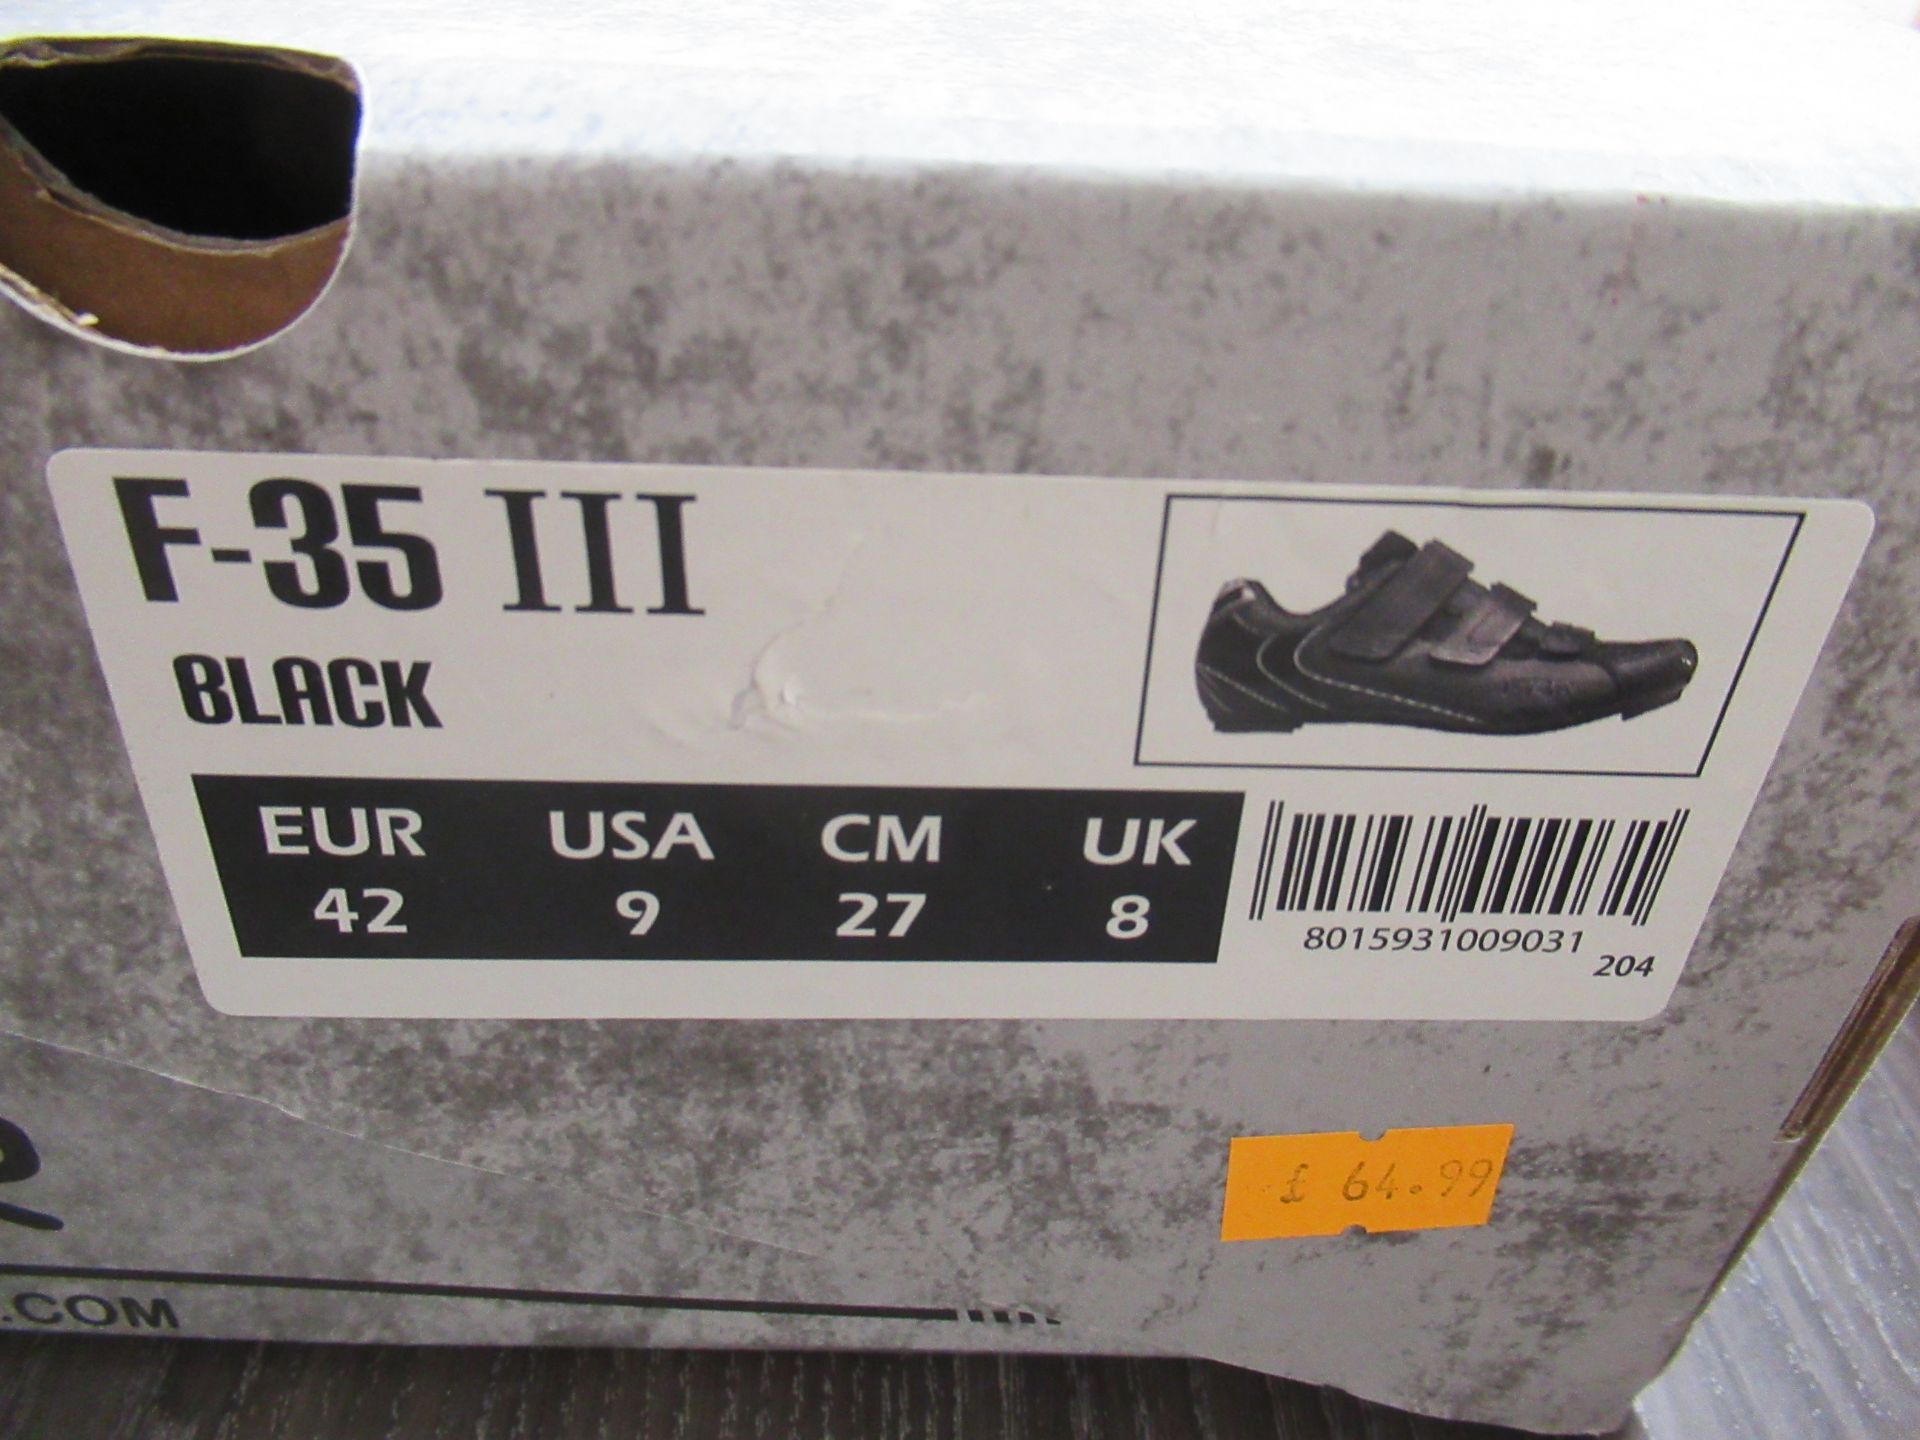 2 x Pairs of cycling shoes: 1 x Northwave Katana SRS boxed EU size 42 (RRP£99.99) and 1 x FLR F-35 I - Image 5 of 7